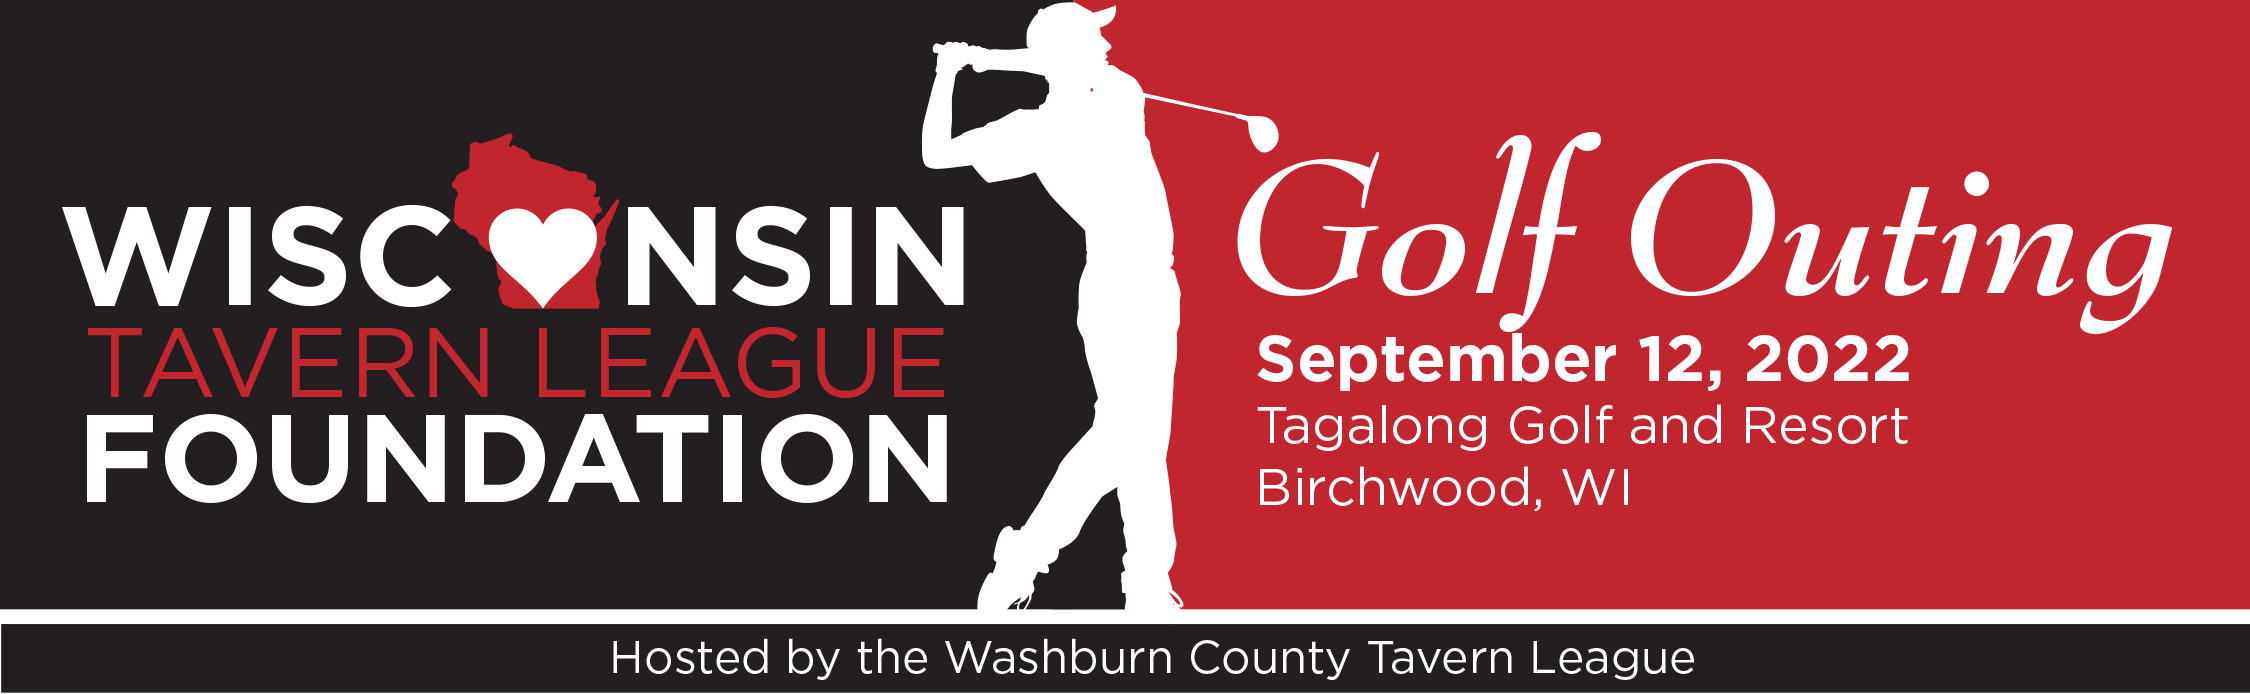 Wisconsin Tavern League Foundation Golf Outing Banner